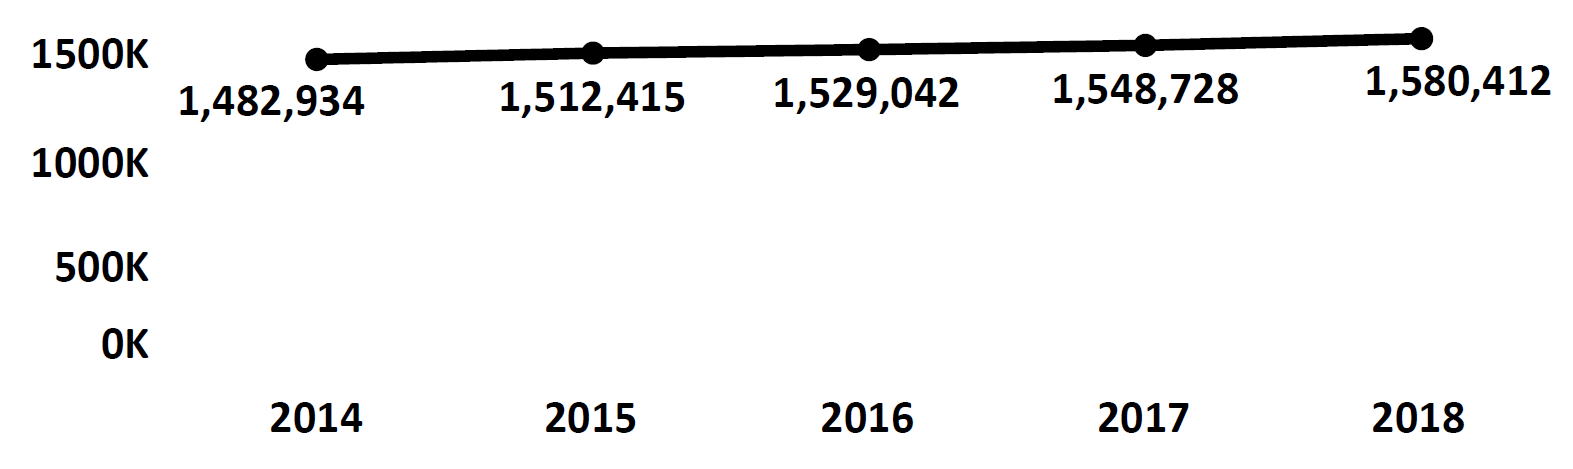 Graph of active Do Not Call registrations in New Mexico each fiscal year from 2014 to 2018. In 2014 there were 1.4 million numbers registered, which increased each year. In 2018 there were 1.5 million numbers registered.